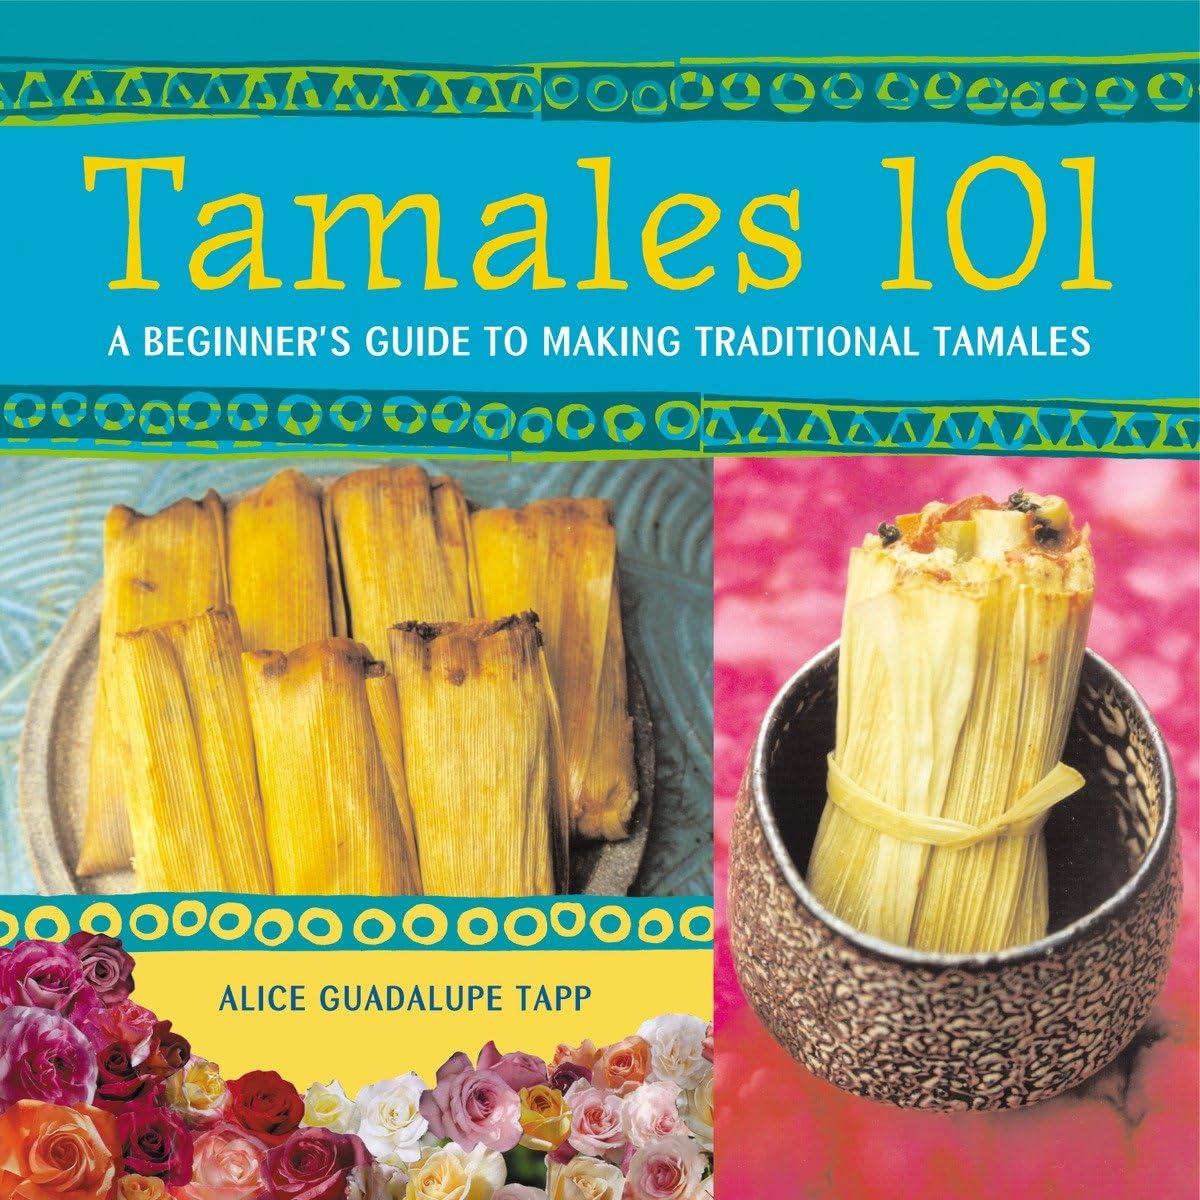 Tamales 101: A Beginner's Guide to Making Traditional Tamales (Alice Guadalupe Tapp)